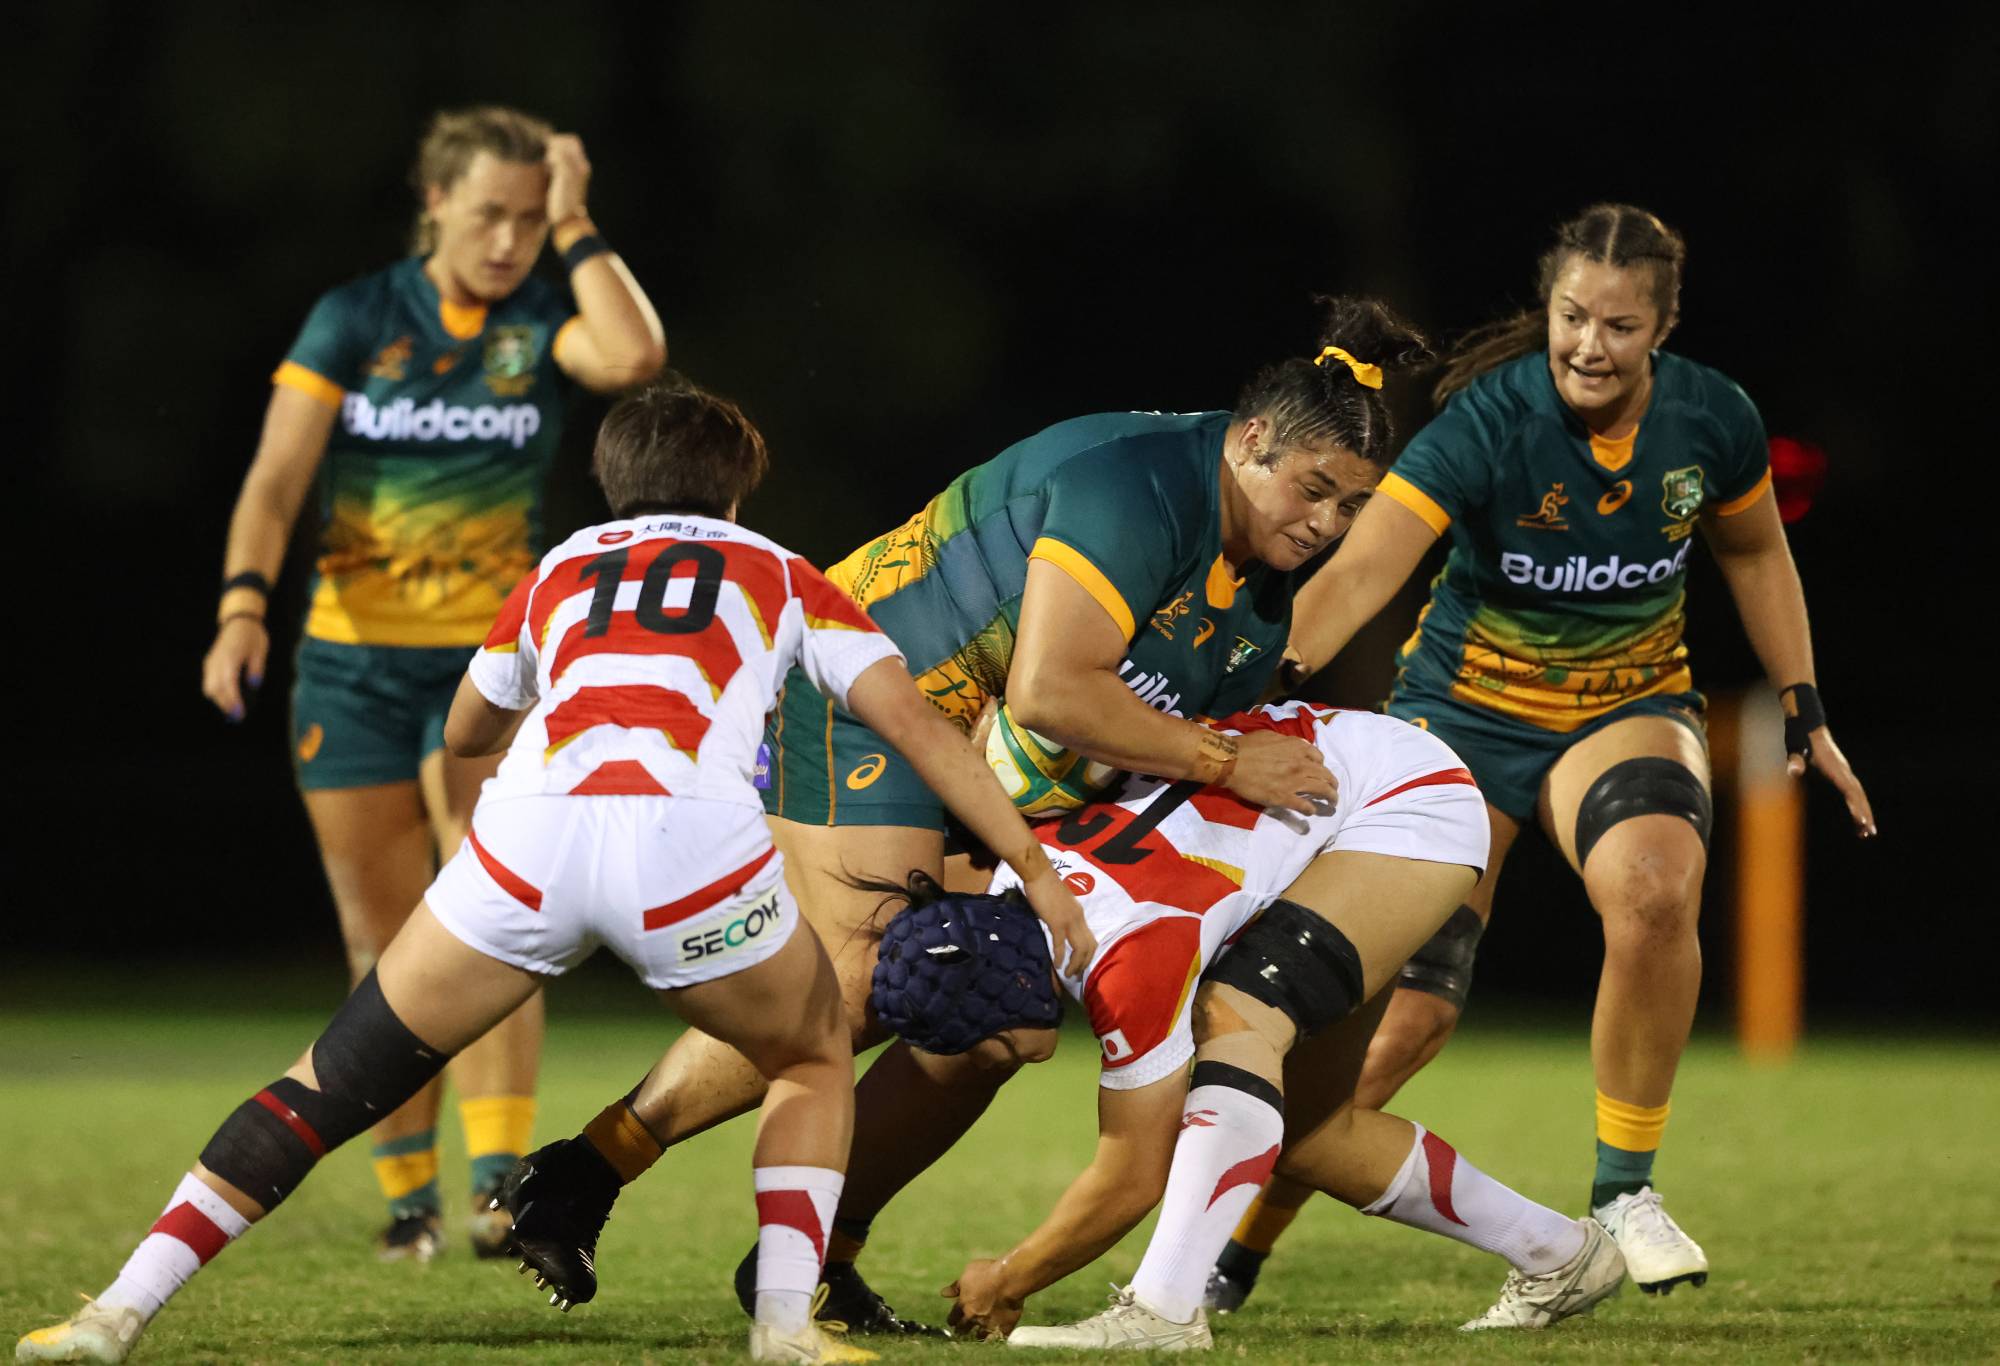 Asoiva Karpani of the Wallaroos is tackled during the Women's International Test match between the Australia Wallaroos and Japan at Bond University on May 10, 2022 in Gold Coast, Australia. (Photo by Chris Hyde/Getty Images)